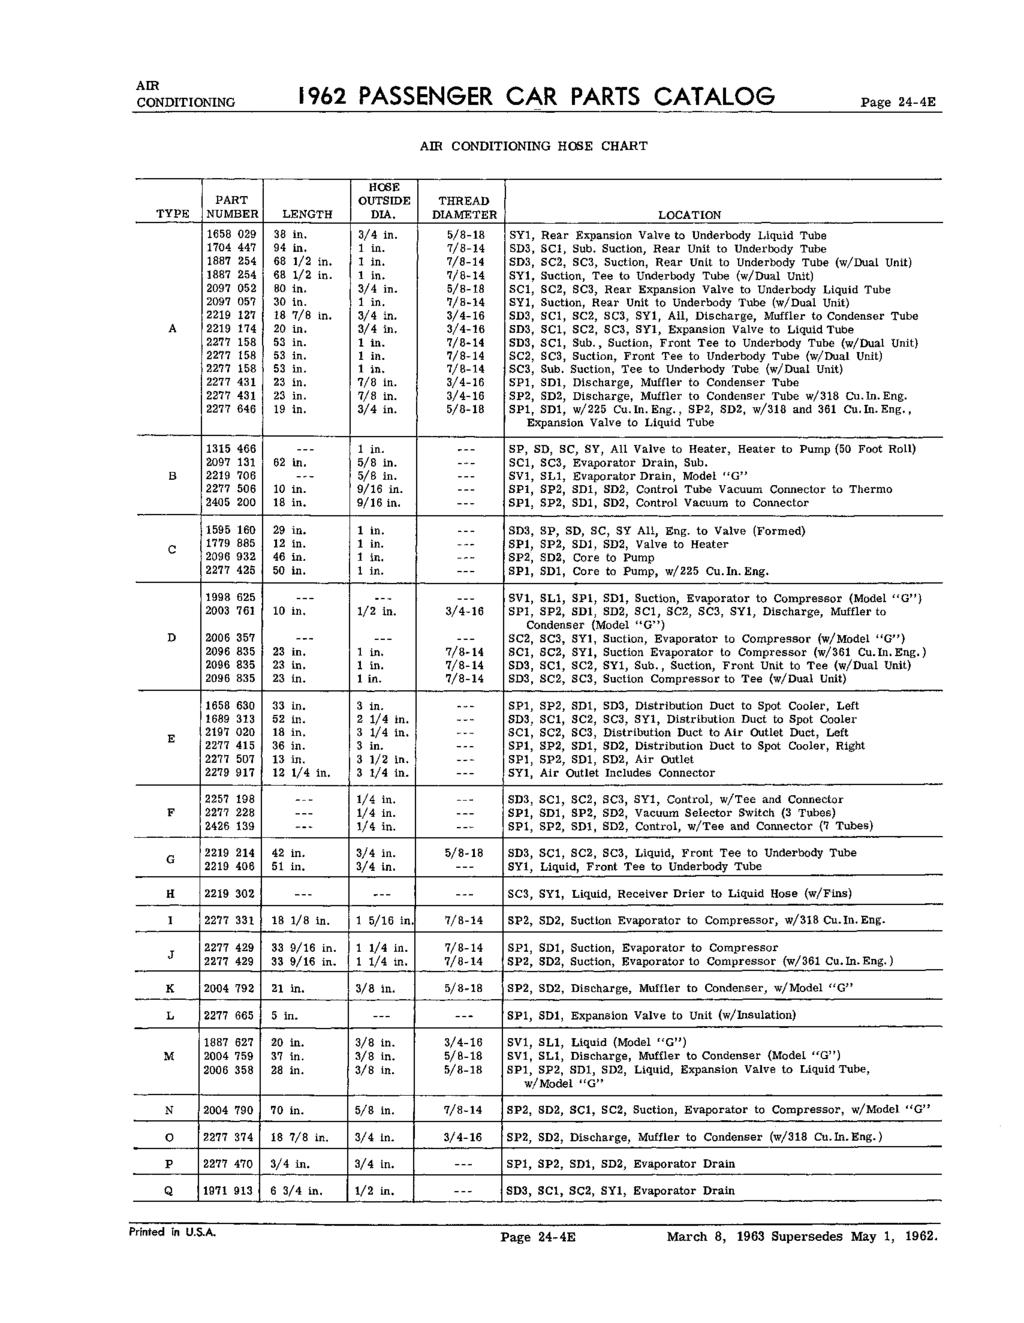 Am CONDITIONING 1962 PASSENGER CAR PARTS CATALOG Page 24-4E Am CONDITIONING HOSE CHART TYPE A PART NUMBER 1658 029 1704 447 1887 254 1887 254 2097 052 2097 057 2219 127 2219 174 2277 158 2277 158